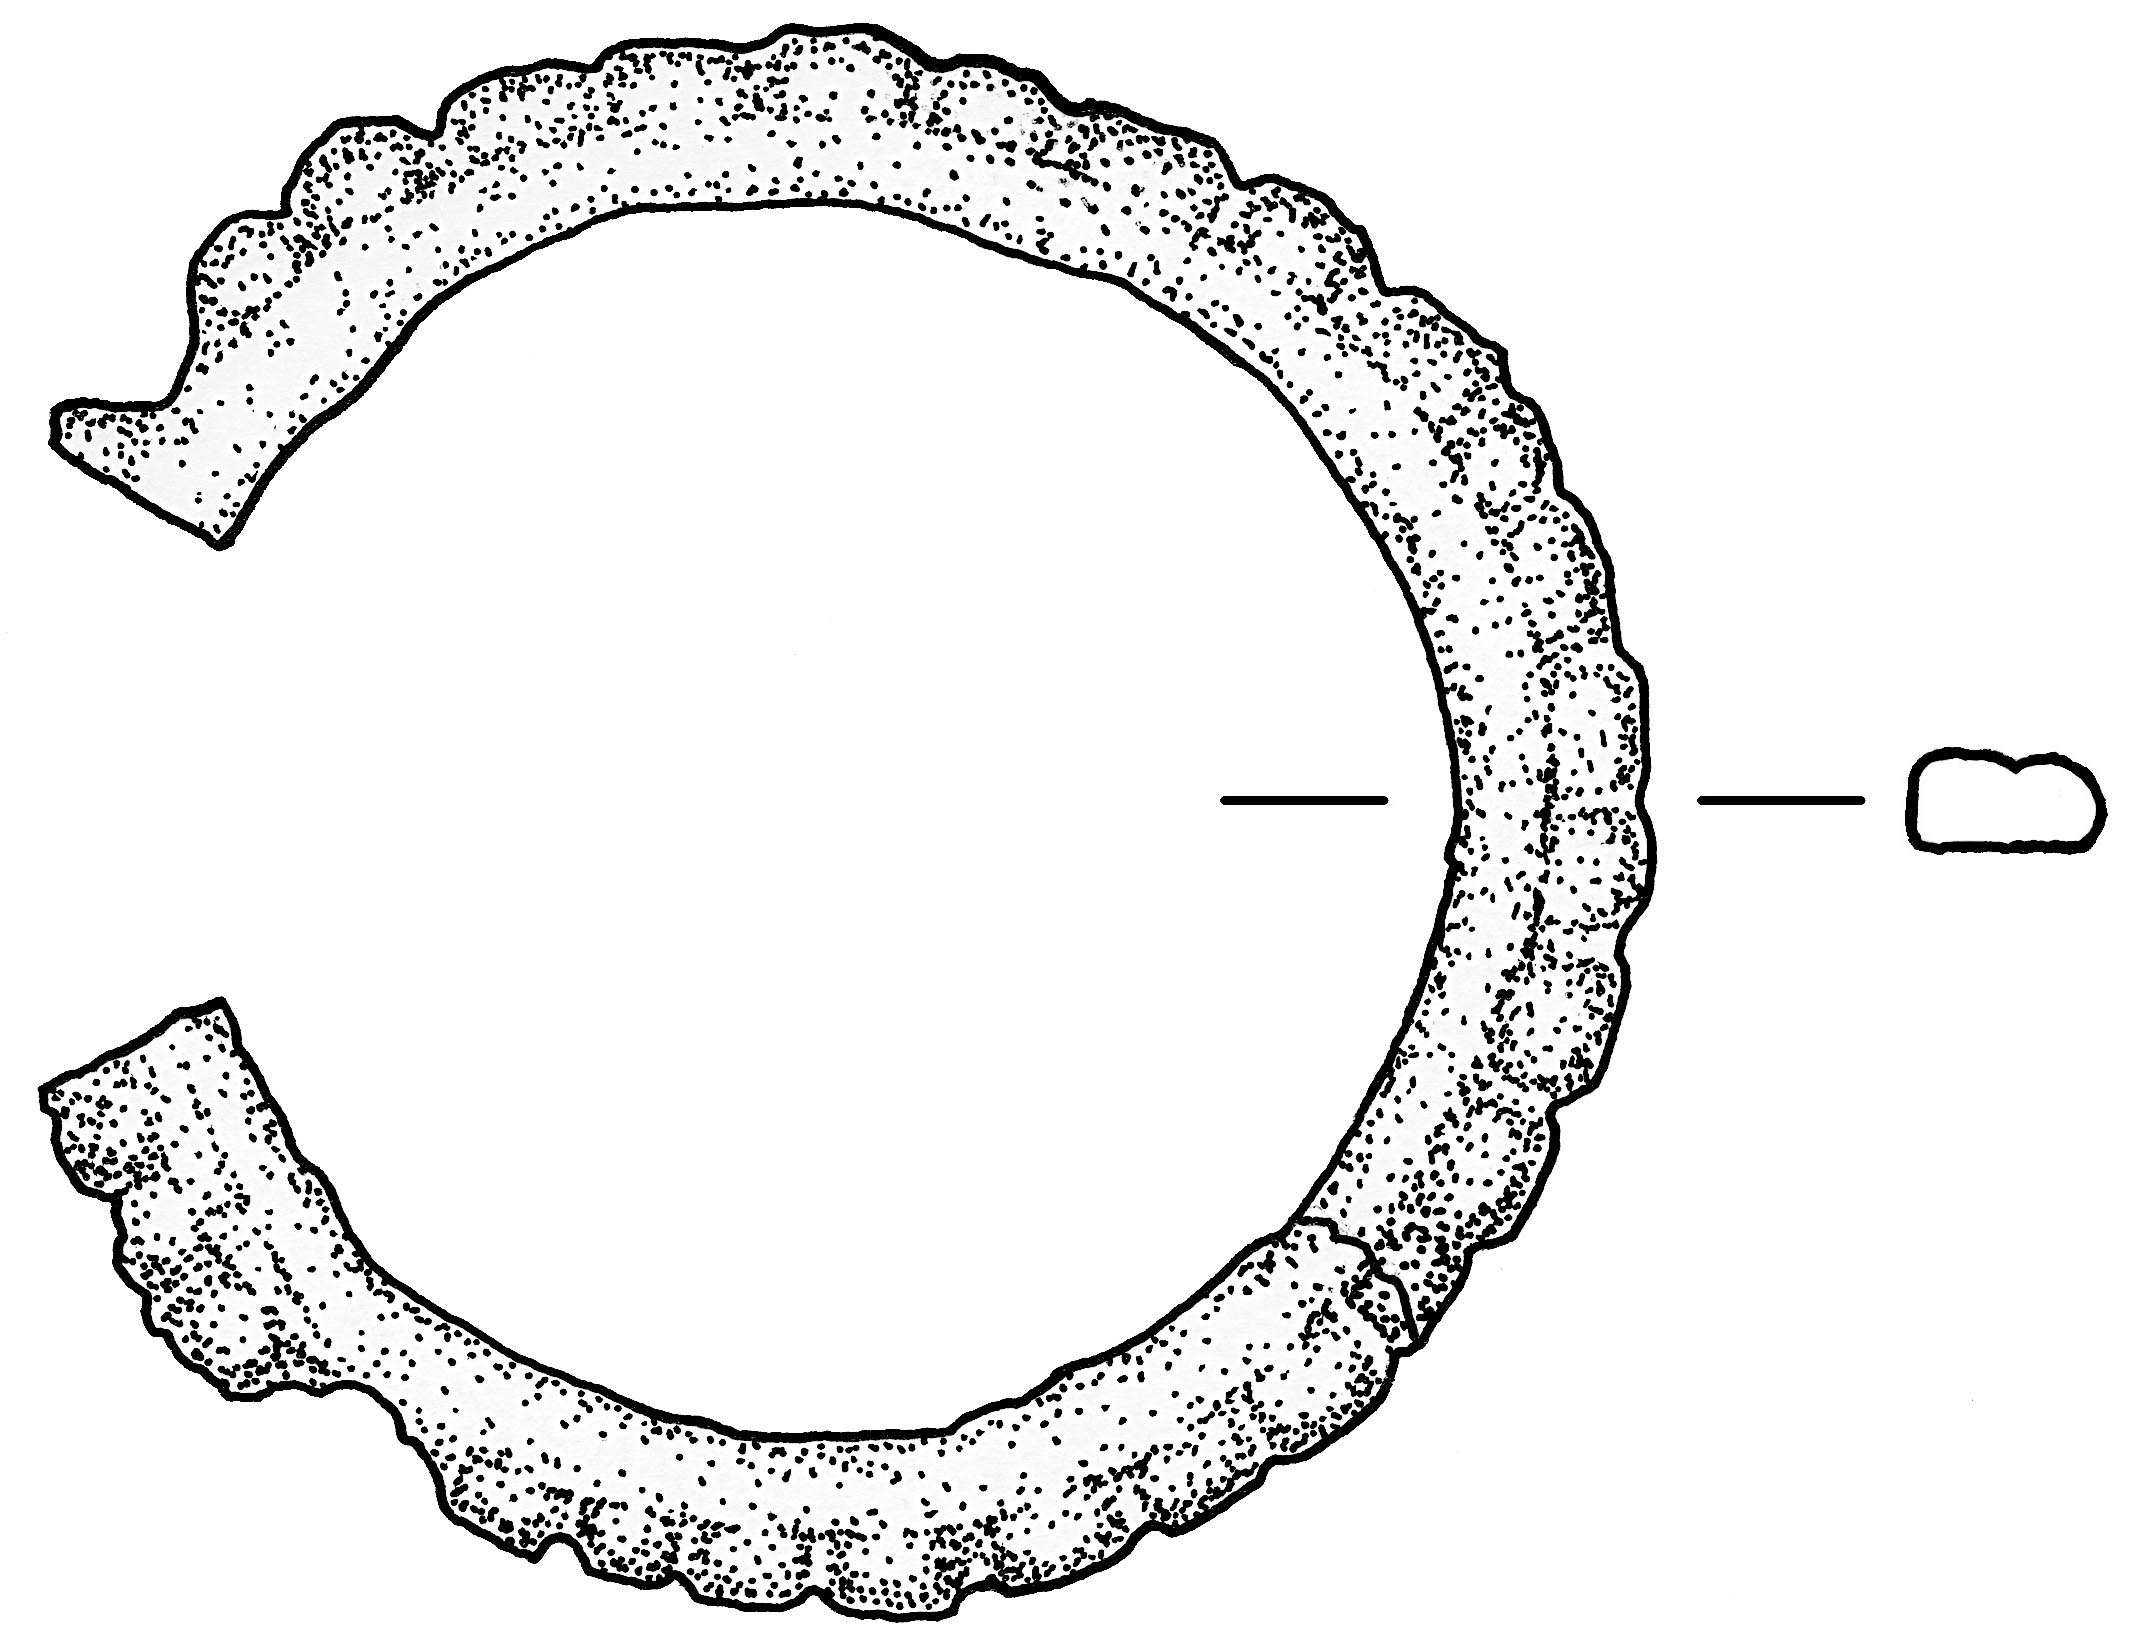 BC 0709A/1594<br>chord length=6.8 cm
inner diameter=5.1 cm
shaft height=0.4 cm
shaft width=0.8 cm
scalloped edges
Object is one of two rings: each has one flat and one convex surface, allowing the rings to fit together as a set. Knobs are 0.5 cm. 